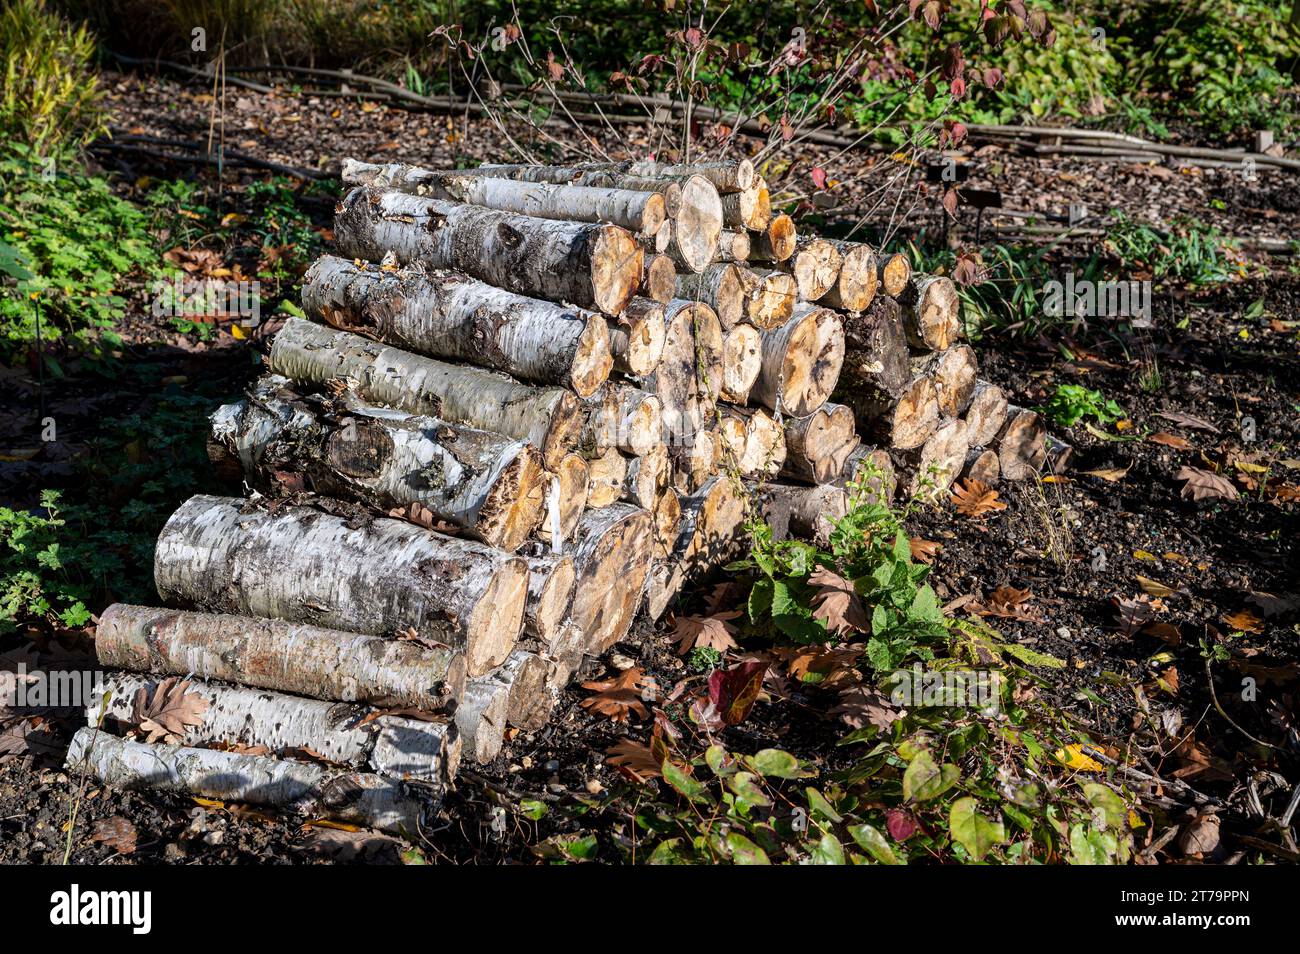 Pile of logs creating a wildlife habitat. Log pile insect and invertebrate shelter. Stock Photo